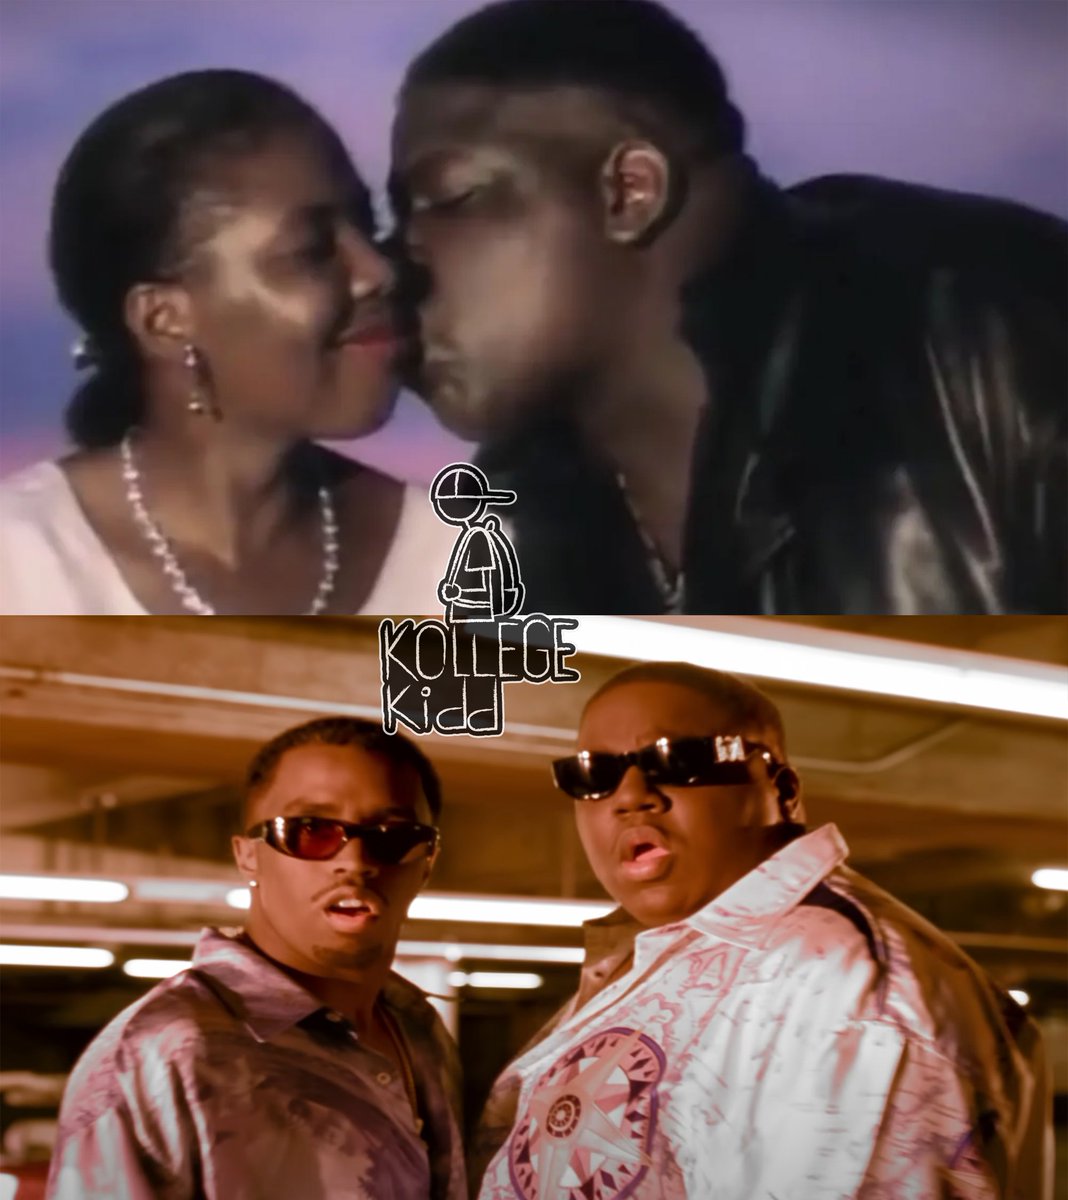 Biggie’s mom Voletta Wallace hopes Diddy apologizes to Cassie and his mother, and wants to “slap the daylights out of him.”

“I’m sick to my stomach. I’m praying for Cassie. I’m praying for his mother. I don’t want to believe the things that I’ve heard, but I’ve seen [the hotel